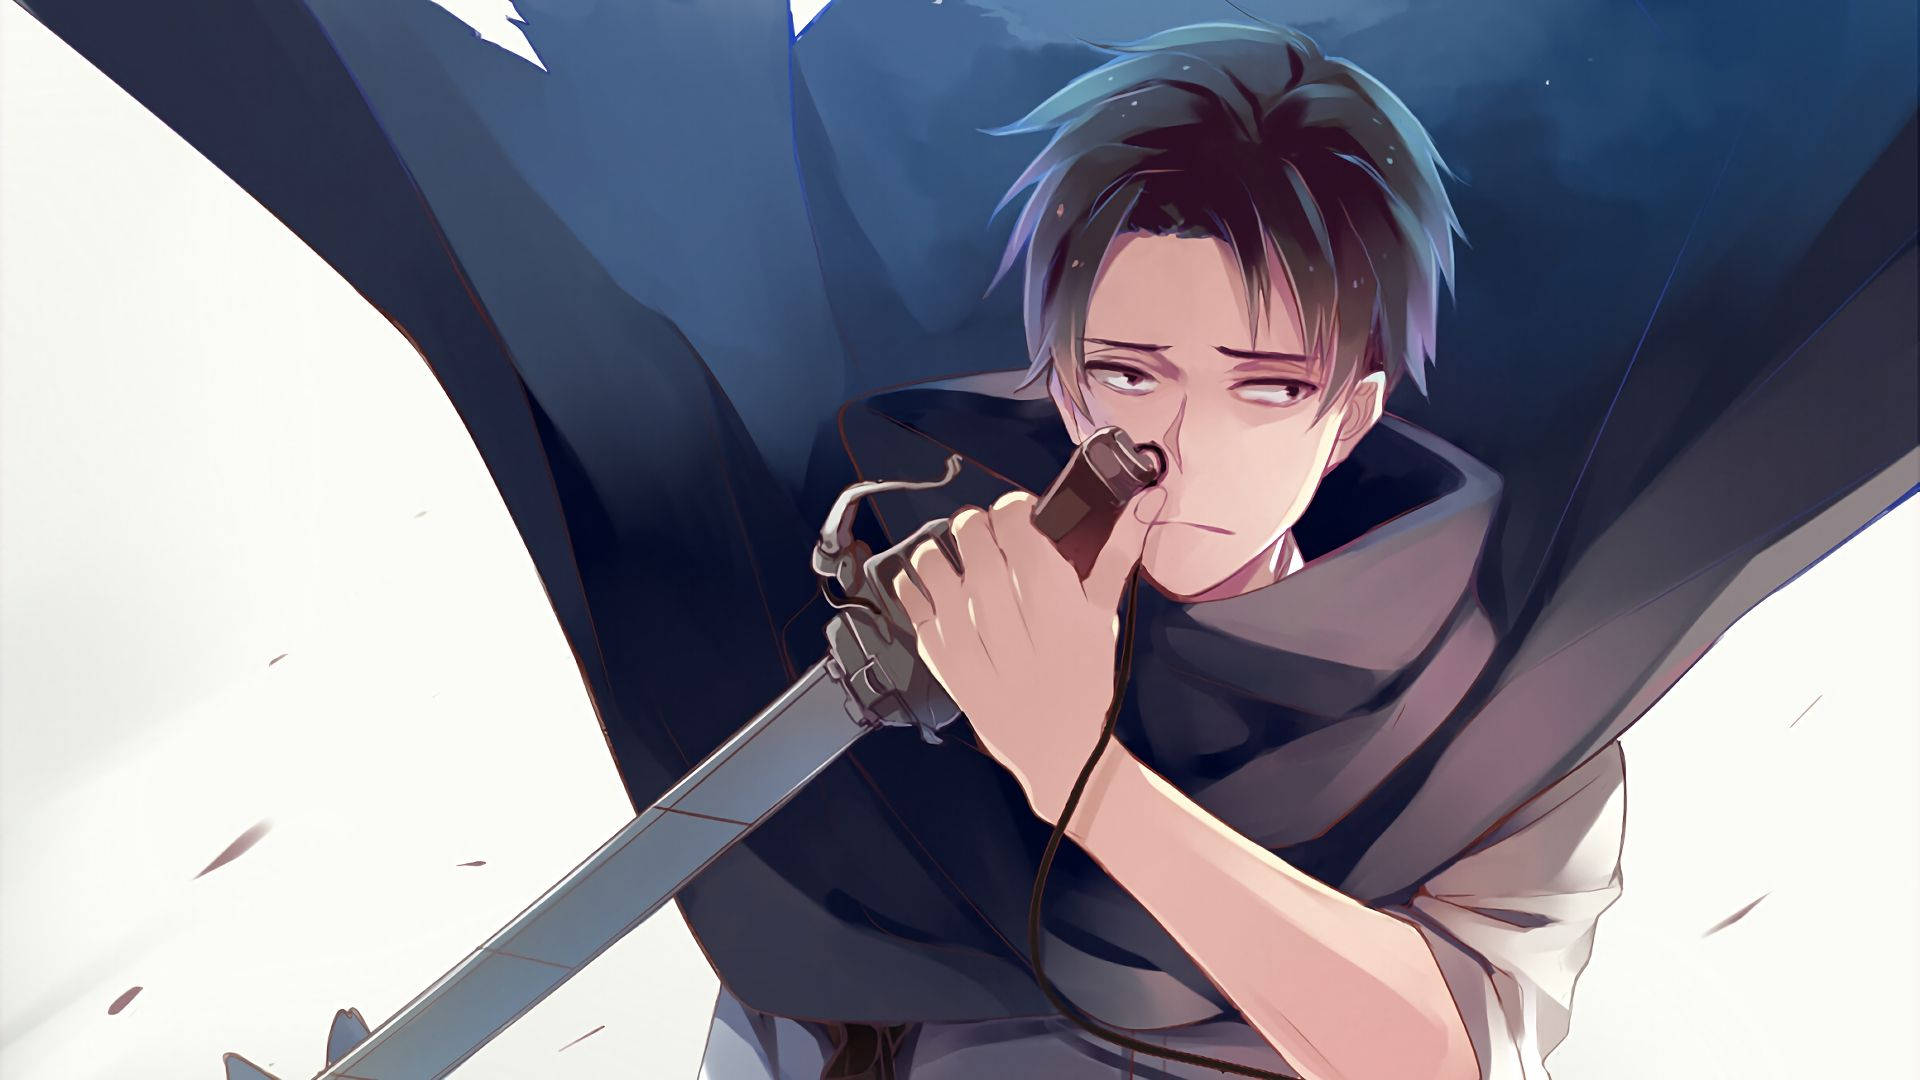 "Levi Ackerman: Unmatched in skill, unmatched in courage" Wallpaper